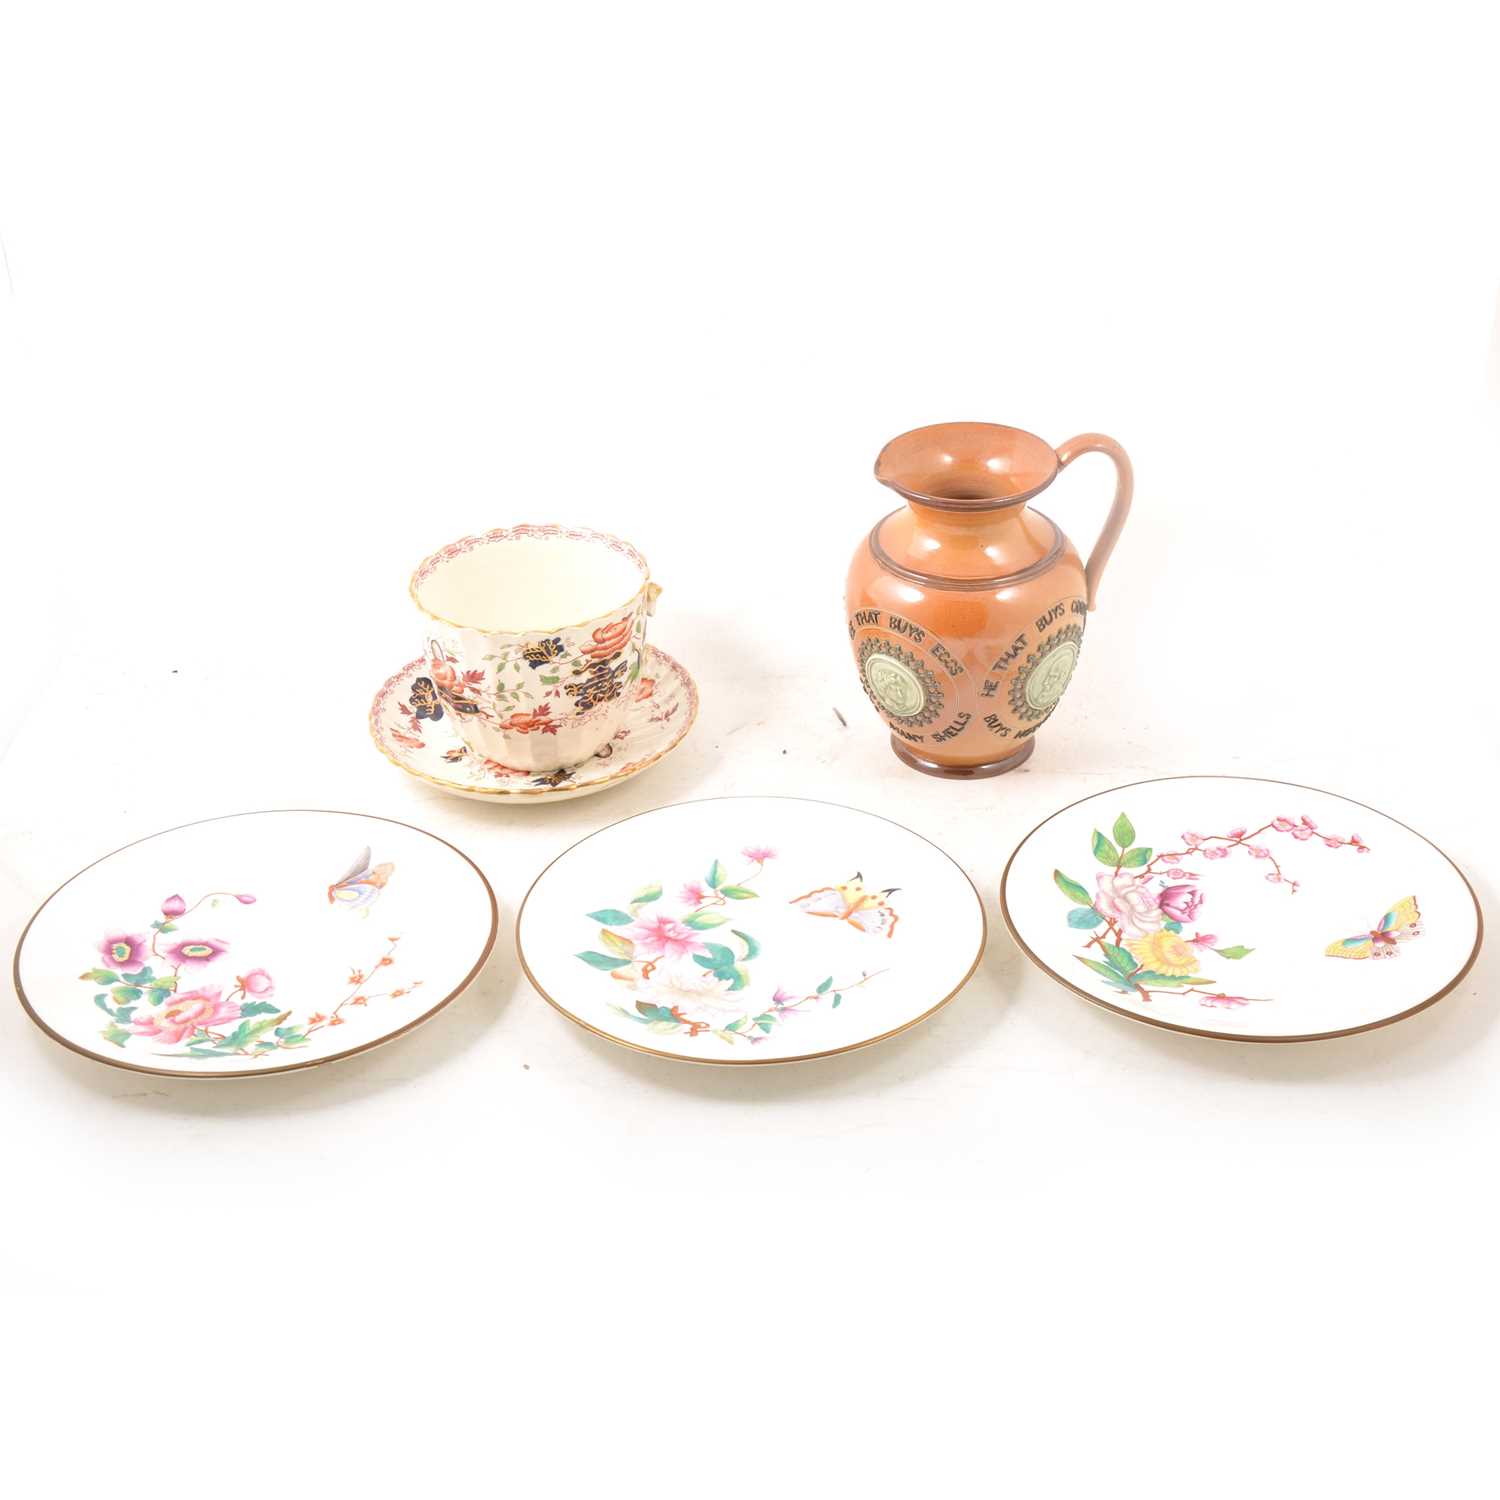 Lot 25 - Royal Worcester plates; Doulton Lambeth motto jug; and Staffordshire breakfast cup and saucer.